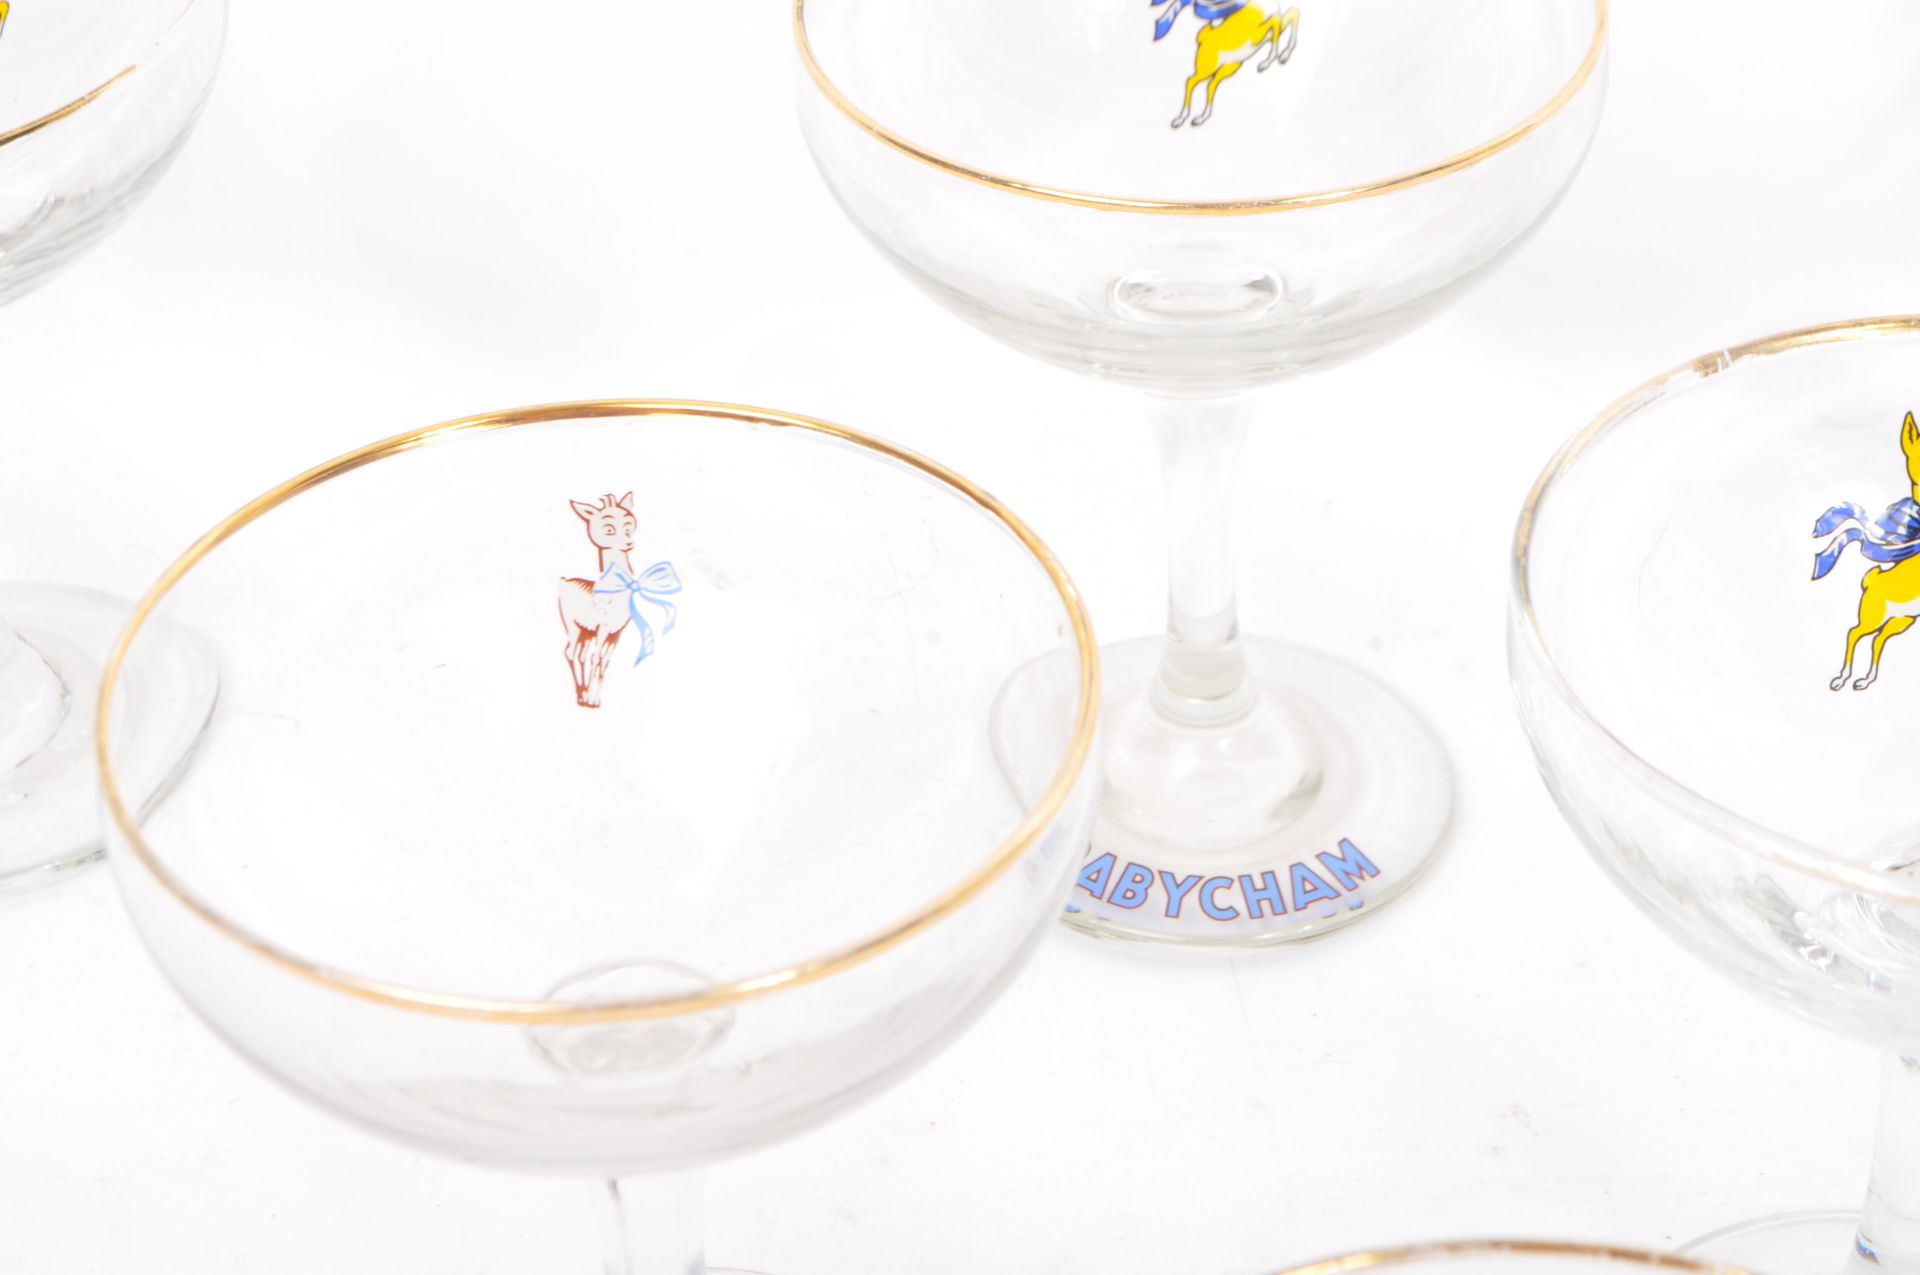 COLLECTION OF VINTAGE BABYCHAM CHAMPAGNE COUPE GLASSES - Image 5 of 6